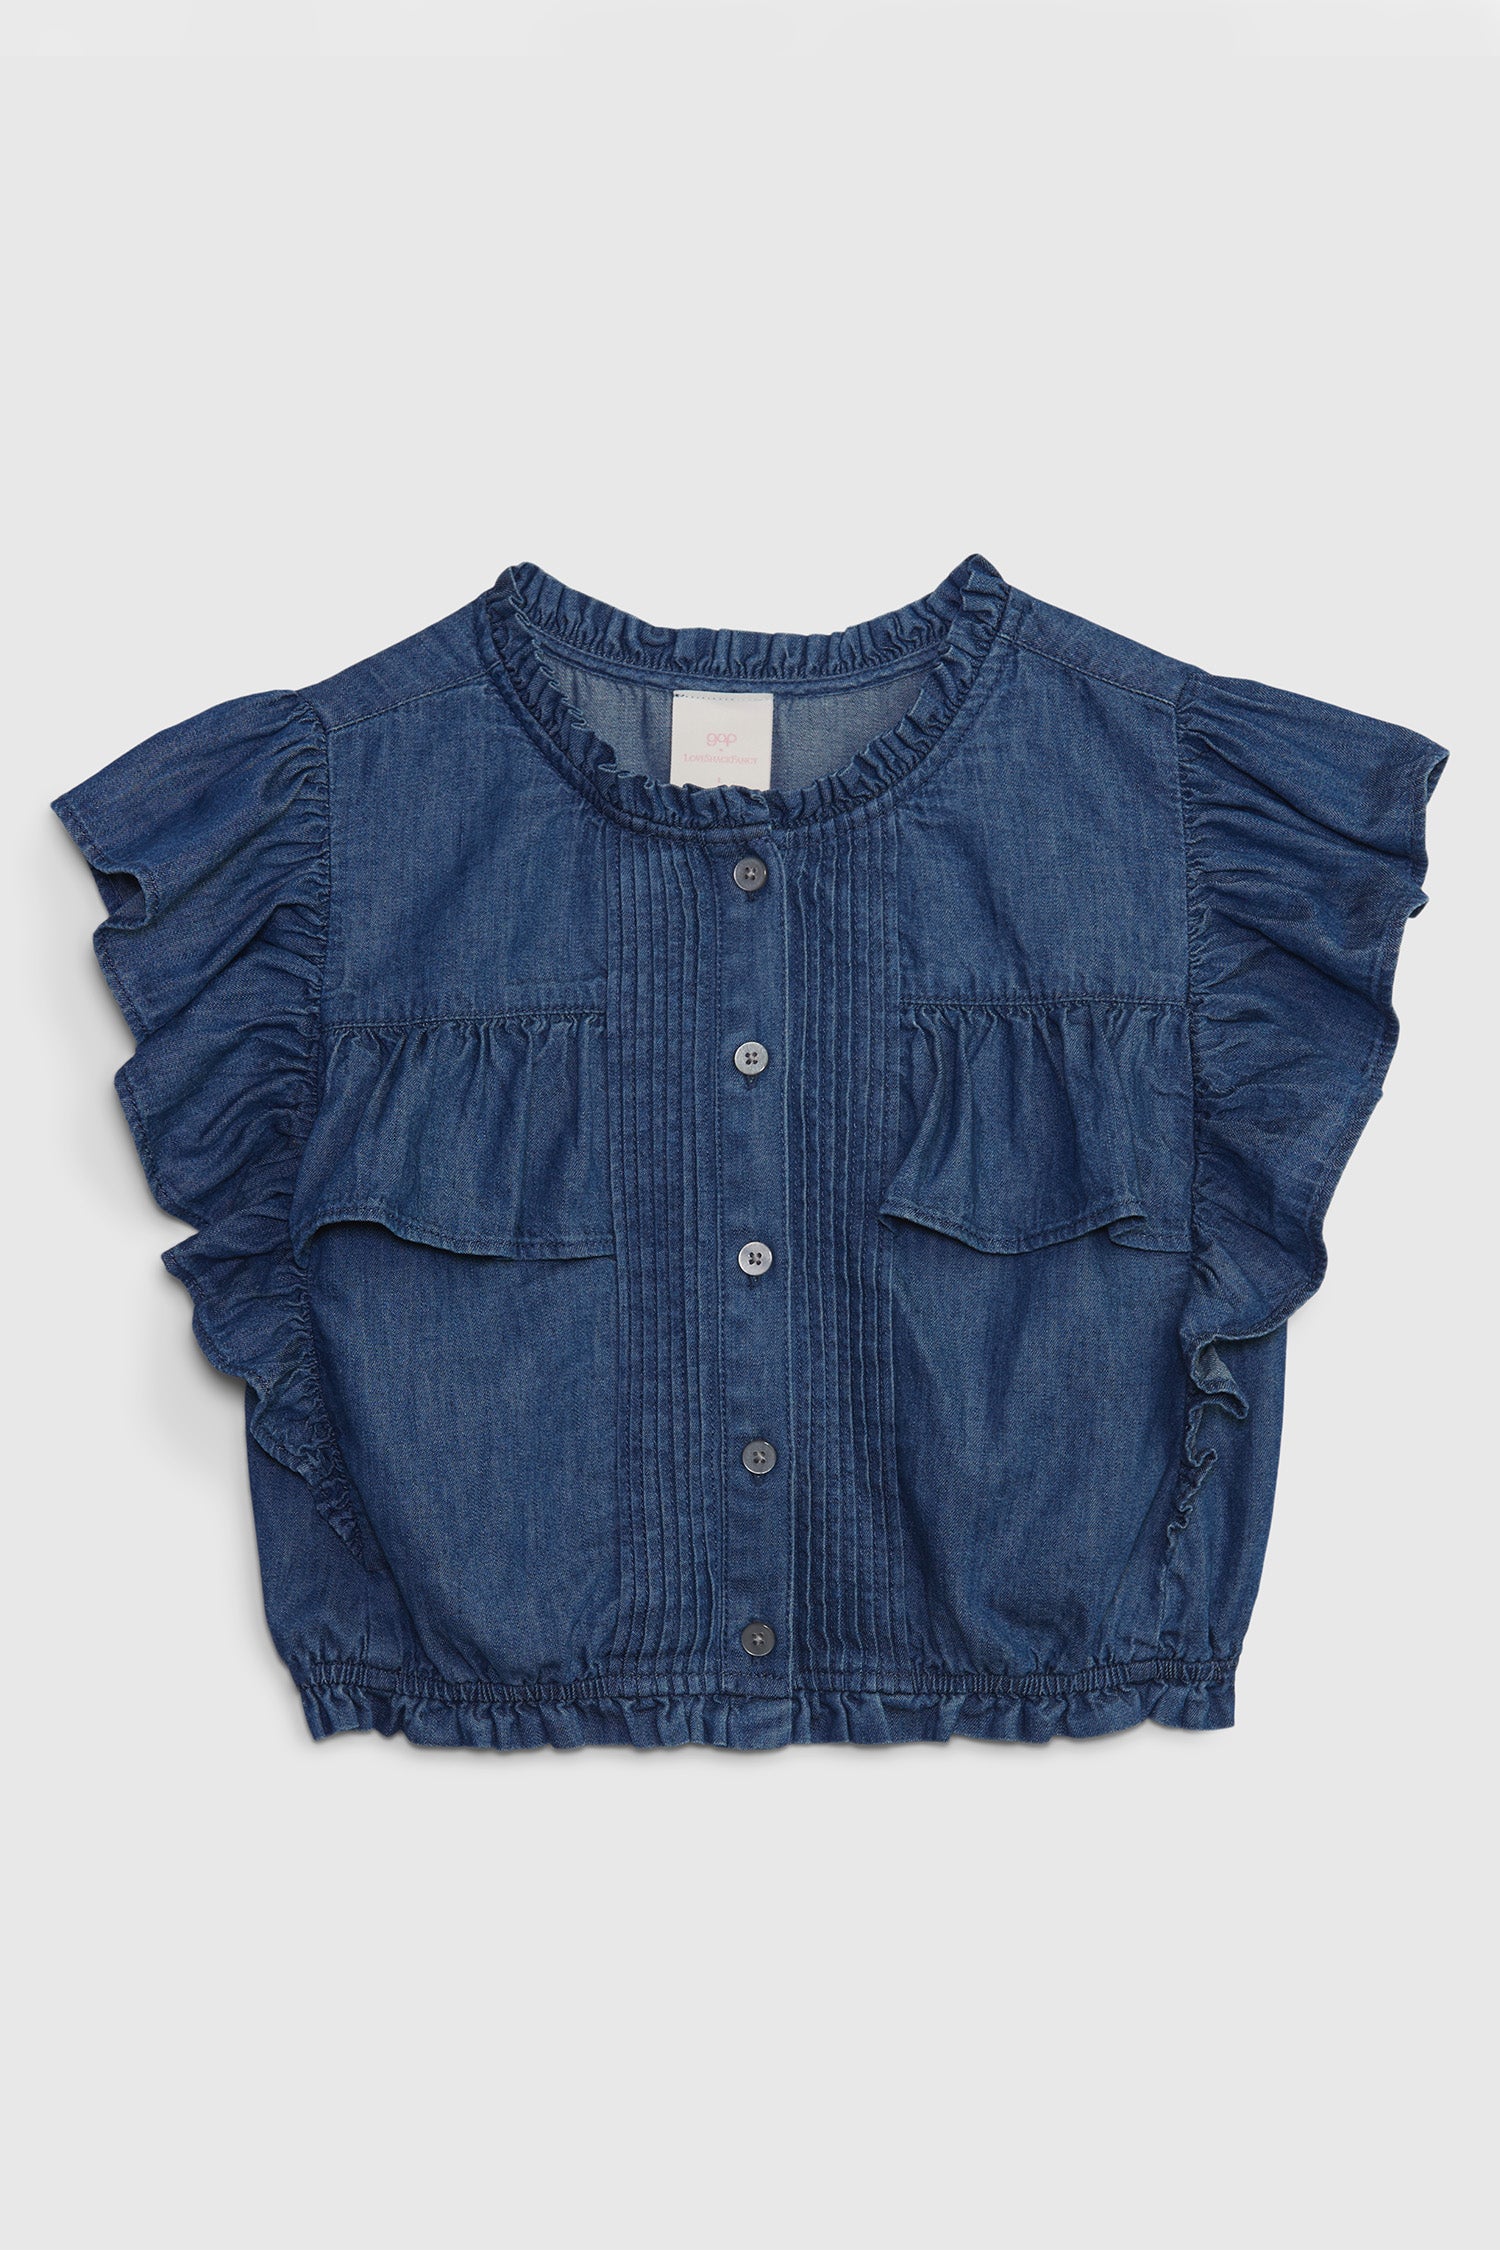 Kids denim ruffle top with buttons at front and ruffled short sleeves.